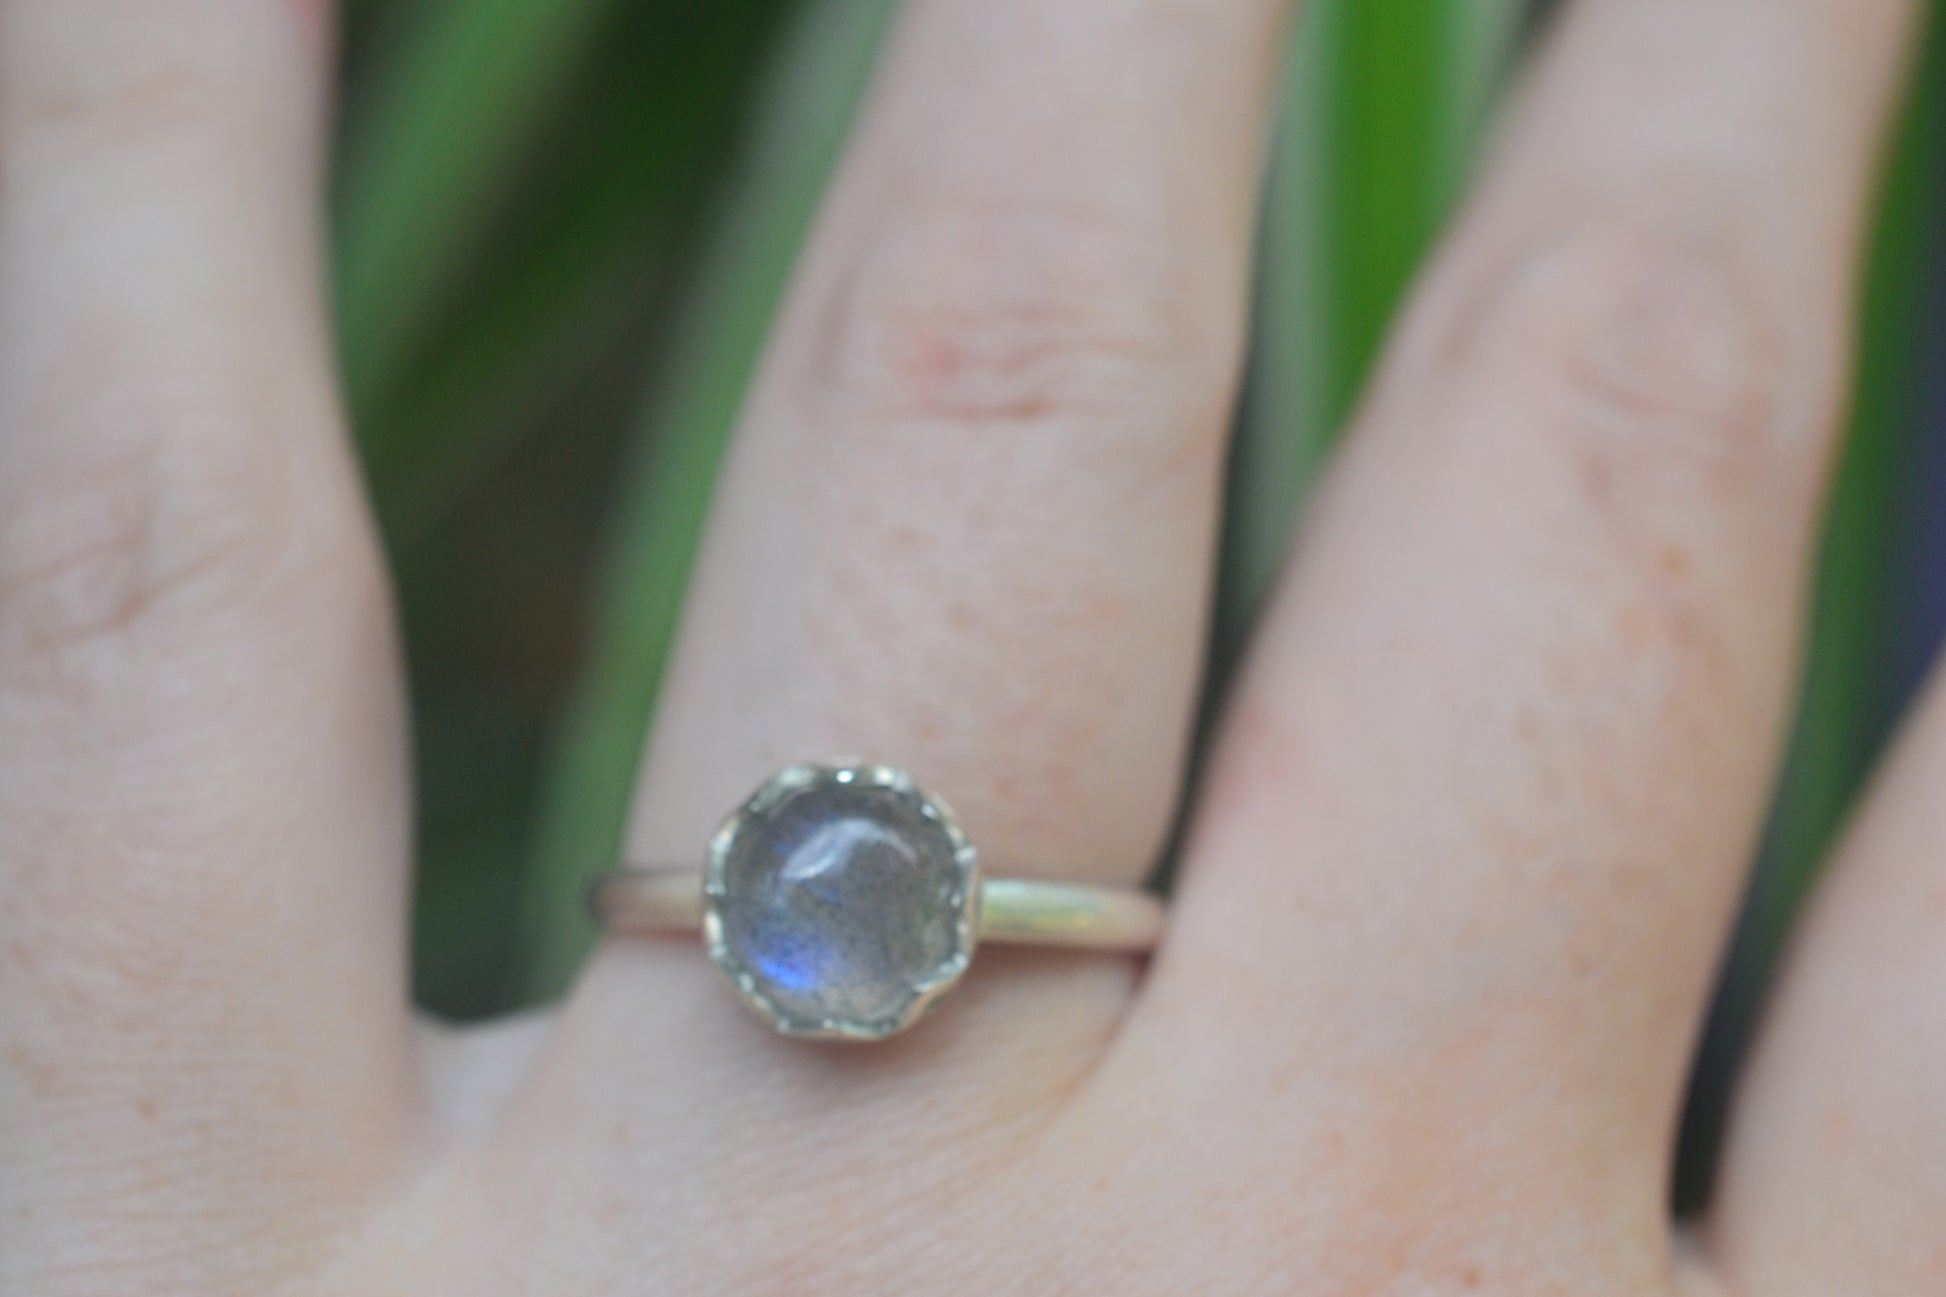 8mm Labradorite Cabochon Ring in Sterling